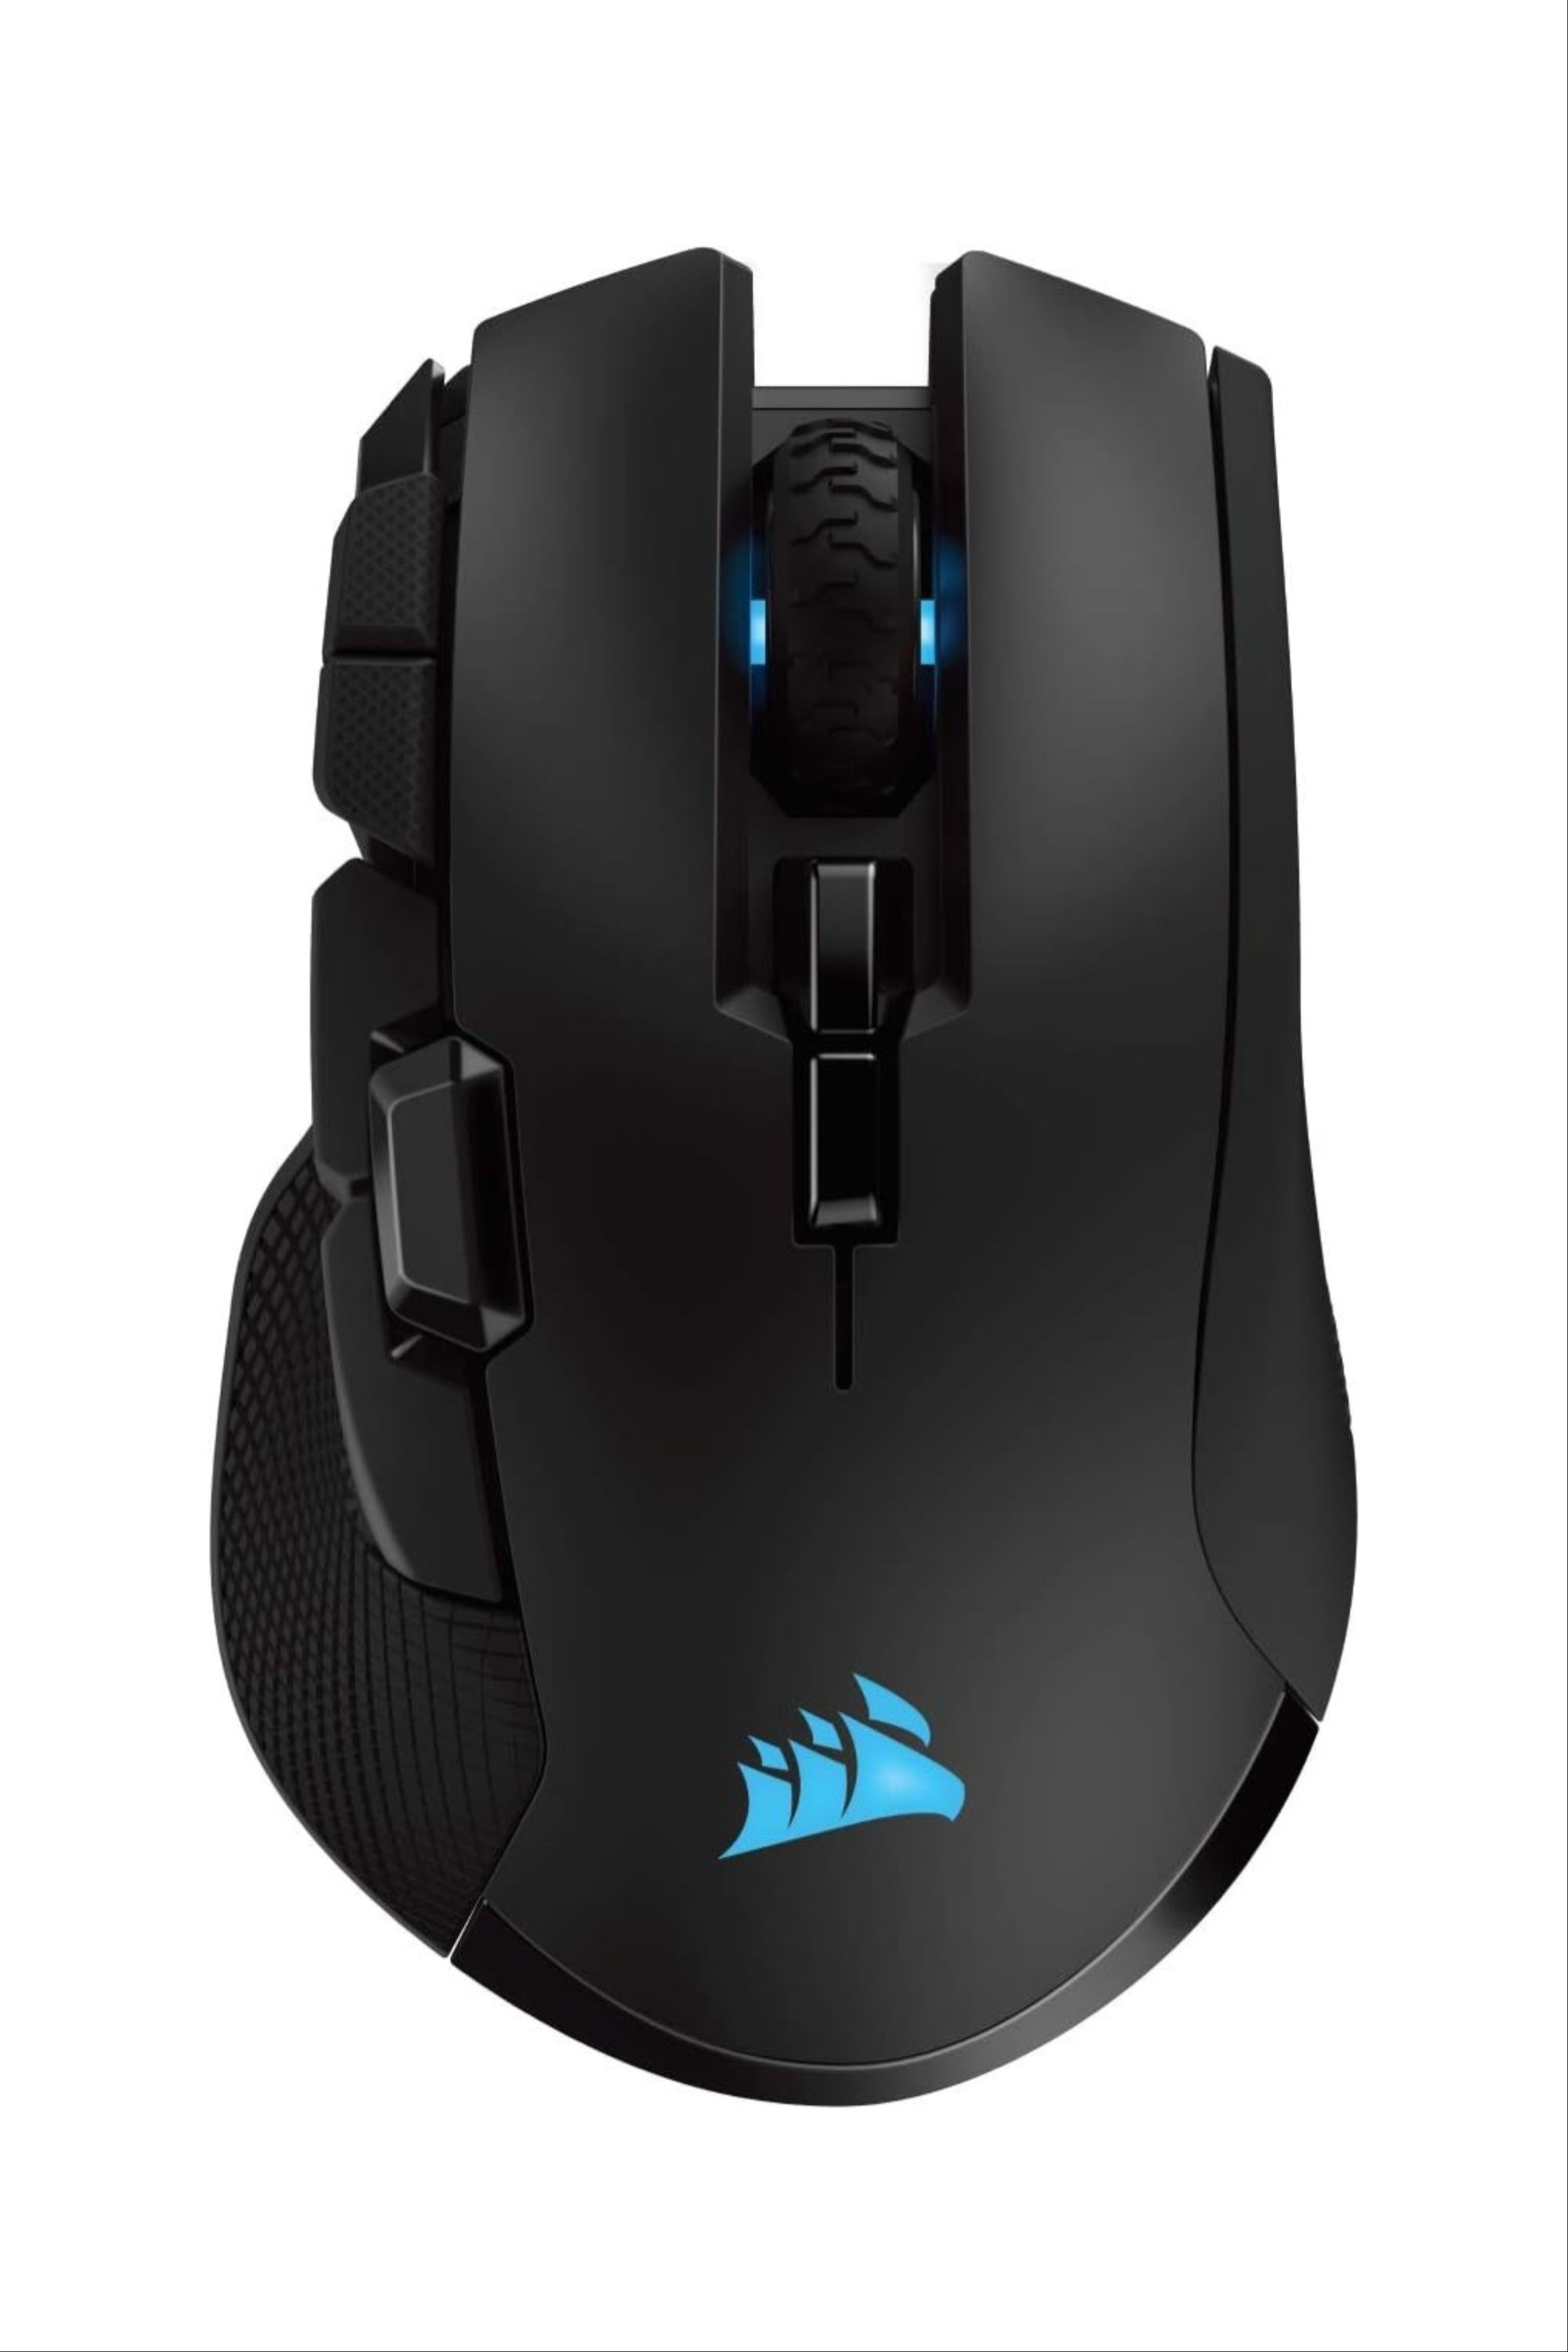 Wired Vs Wireless Mouse: Which Is Better For Gaming?